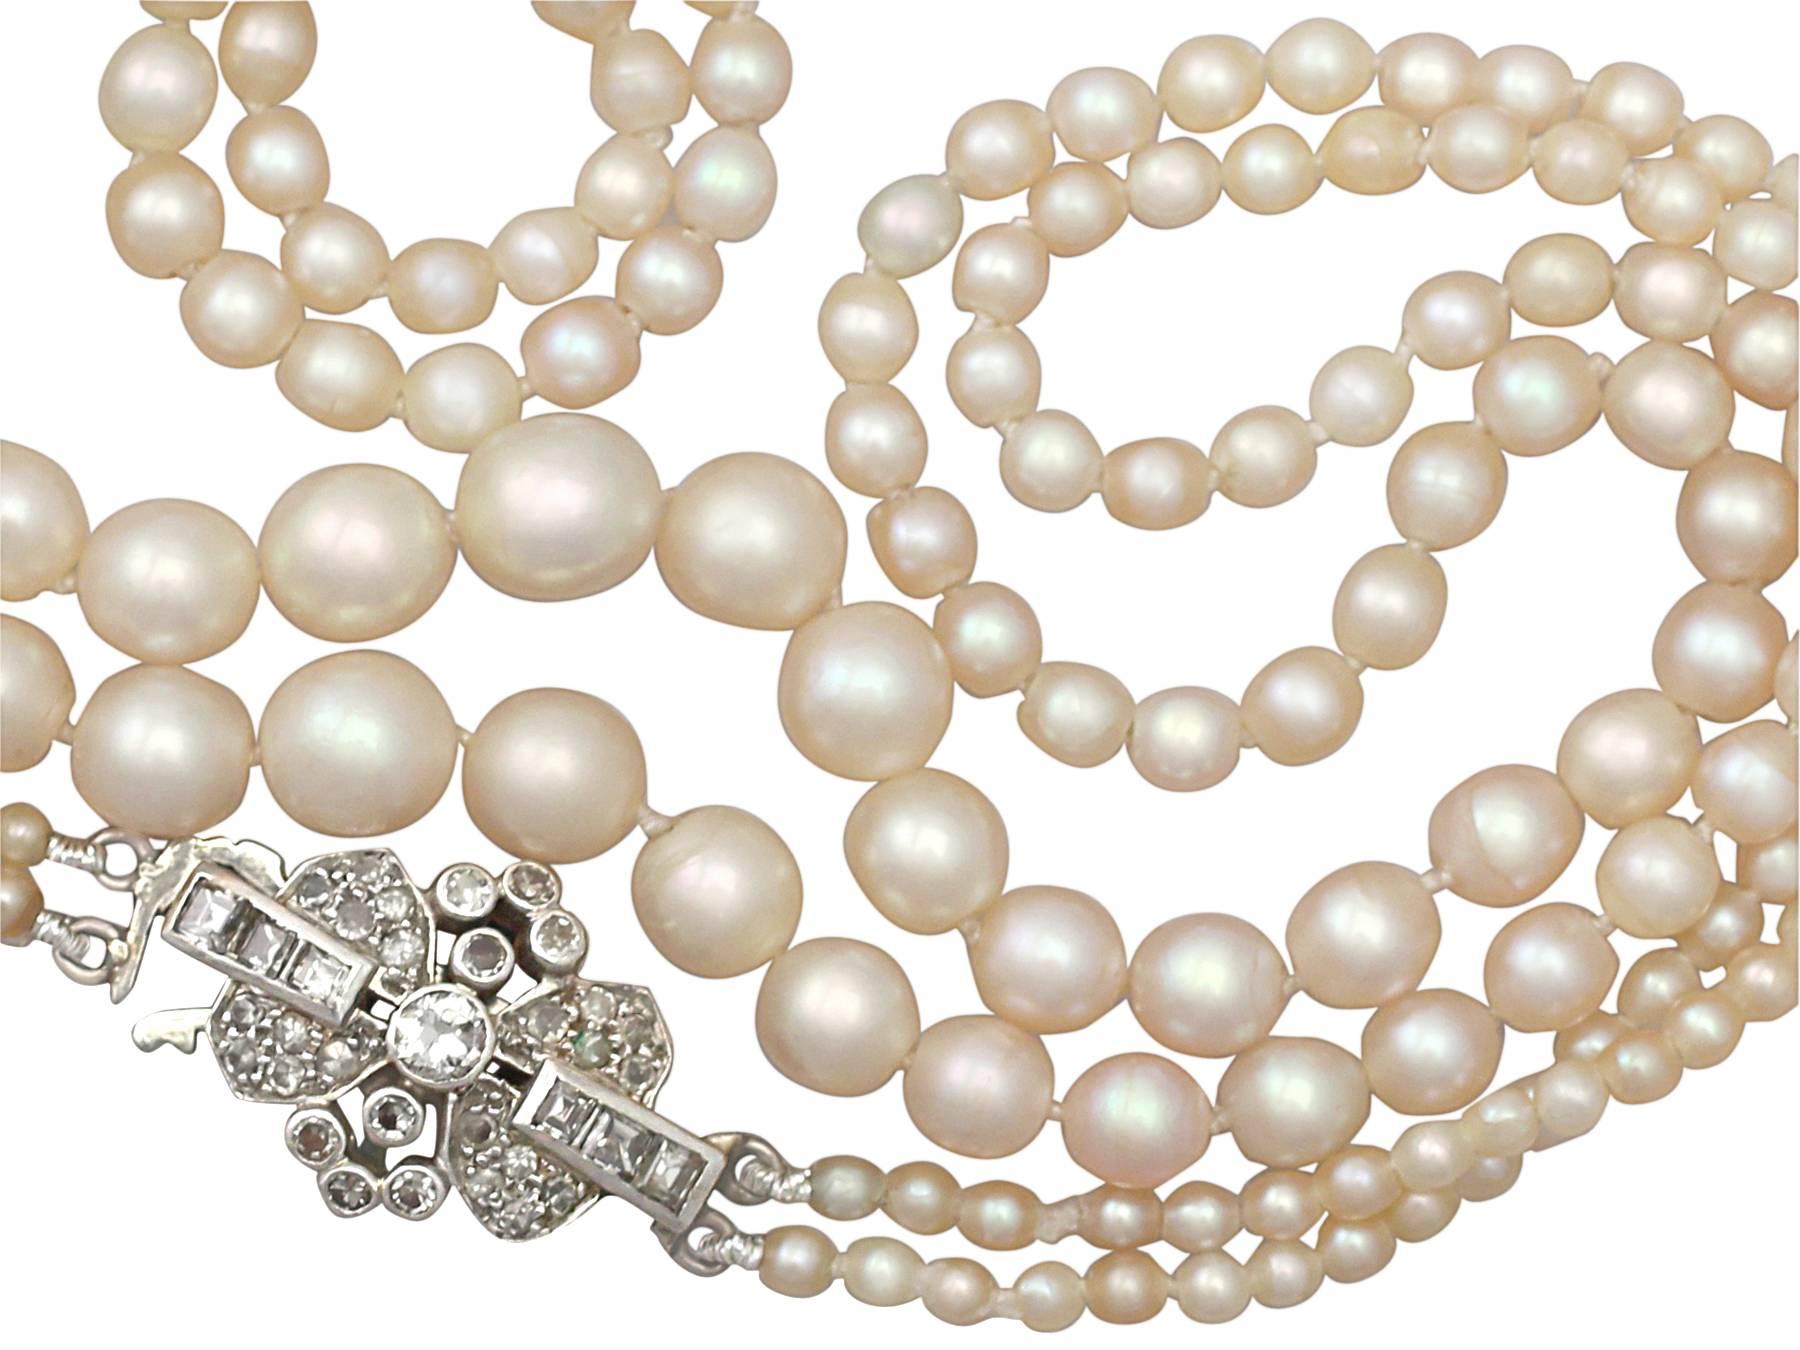 A stunning, fine and impressive double strand pearl necklace with a 0.55 carat diamond, 9 karat white gold and 18 karat white gold, platinum set clasp; part of our diverse necklace and pendant collection

This stunning, fine and impressive choker